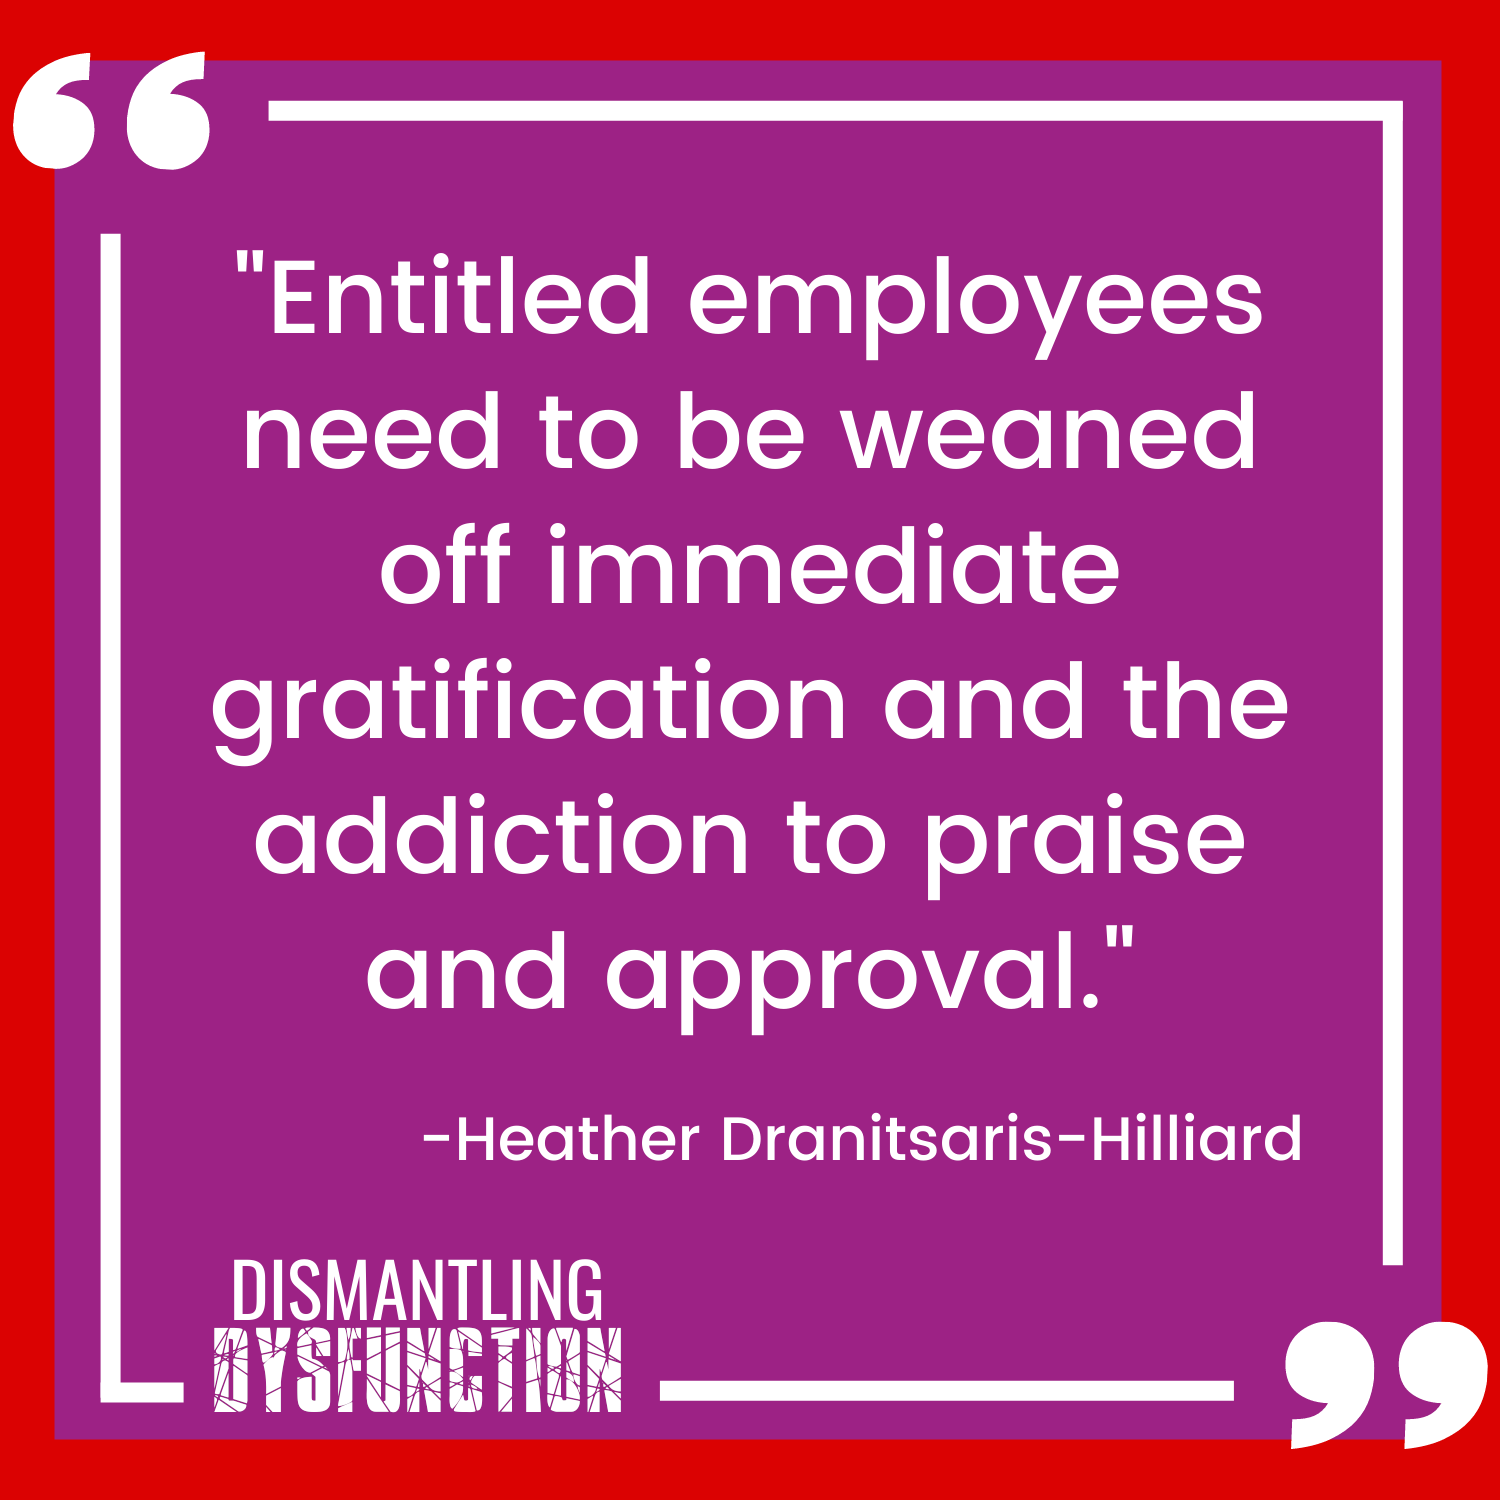 "Entitled employees need to be weaned off immediate gratification and the addiction to praise and approval."